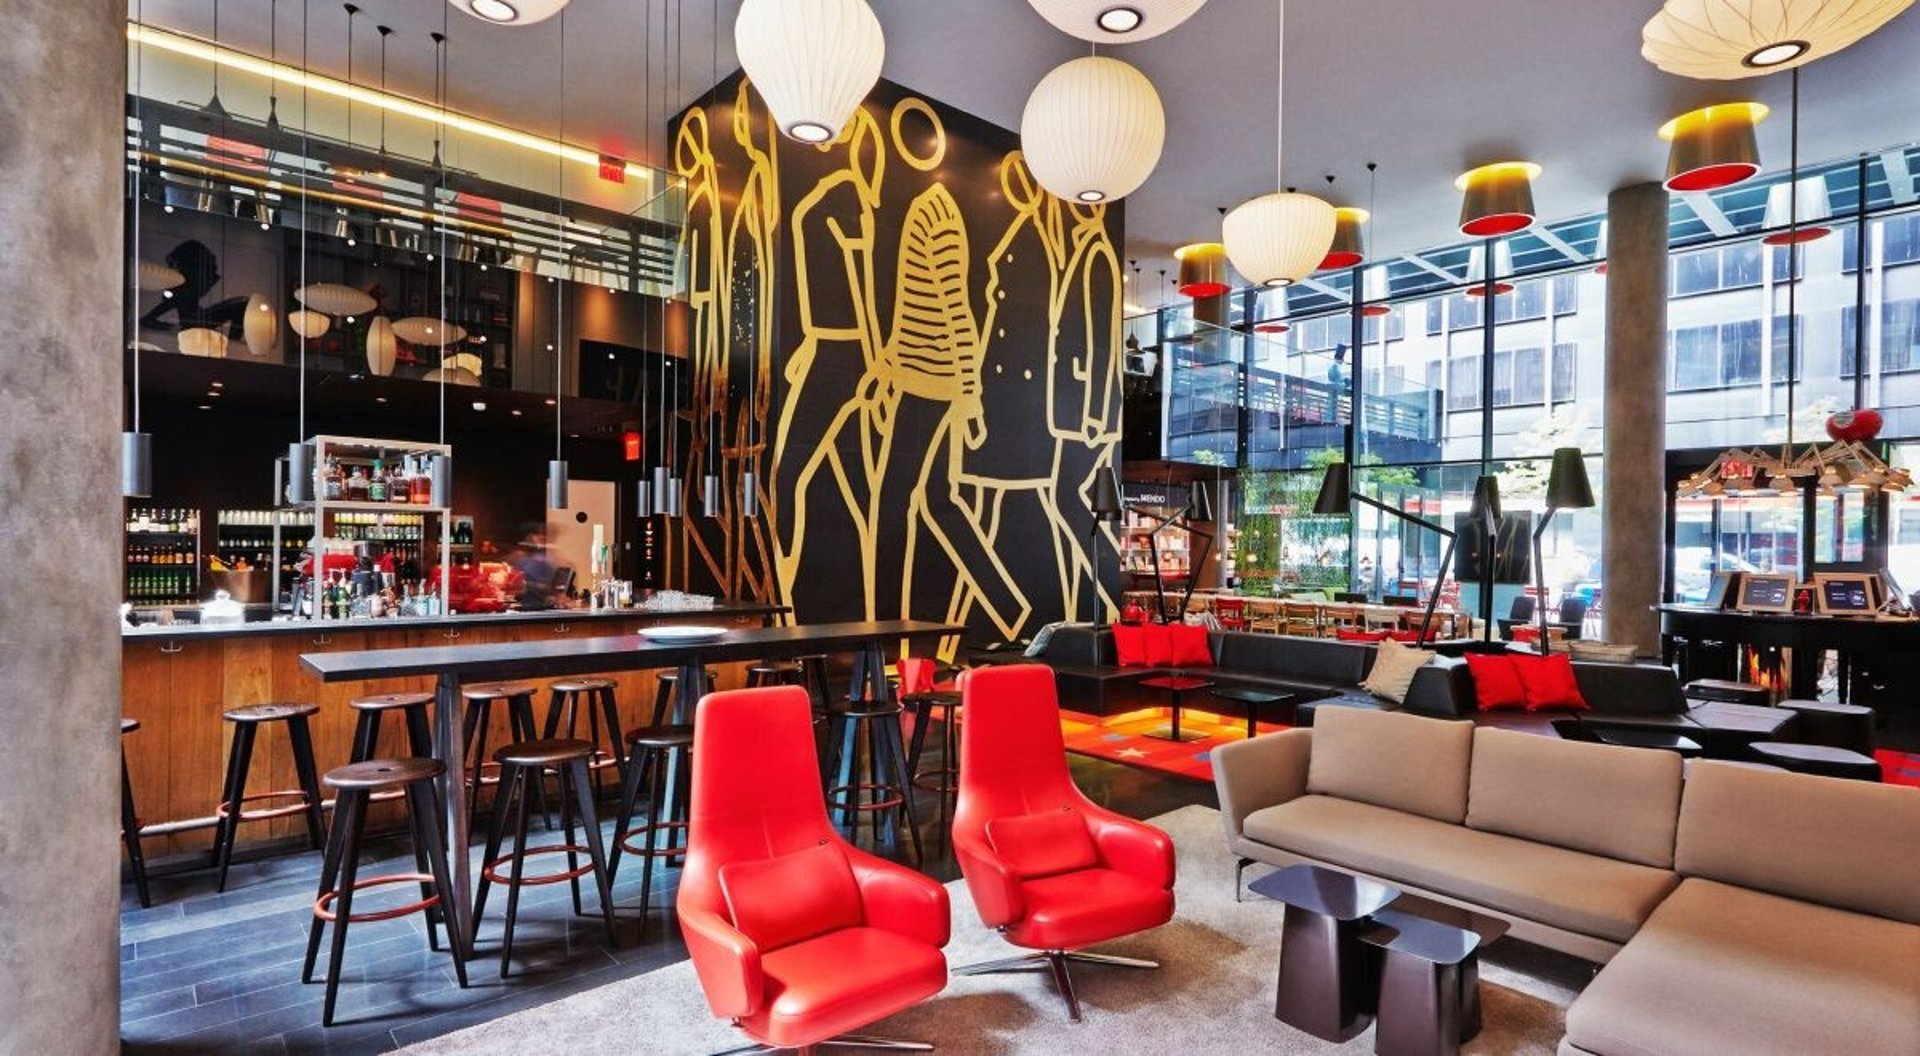 citizenM New York Times Square Hotel - CanteenM bar & Kitchen - Hotel in New  York, NY | The Vendry